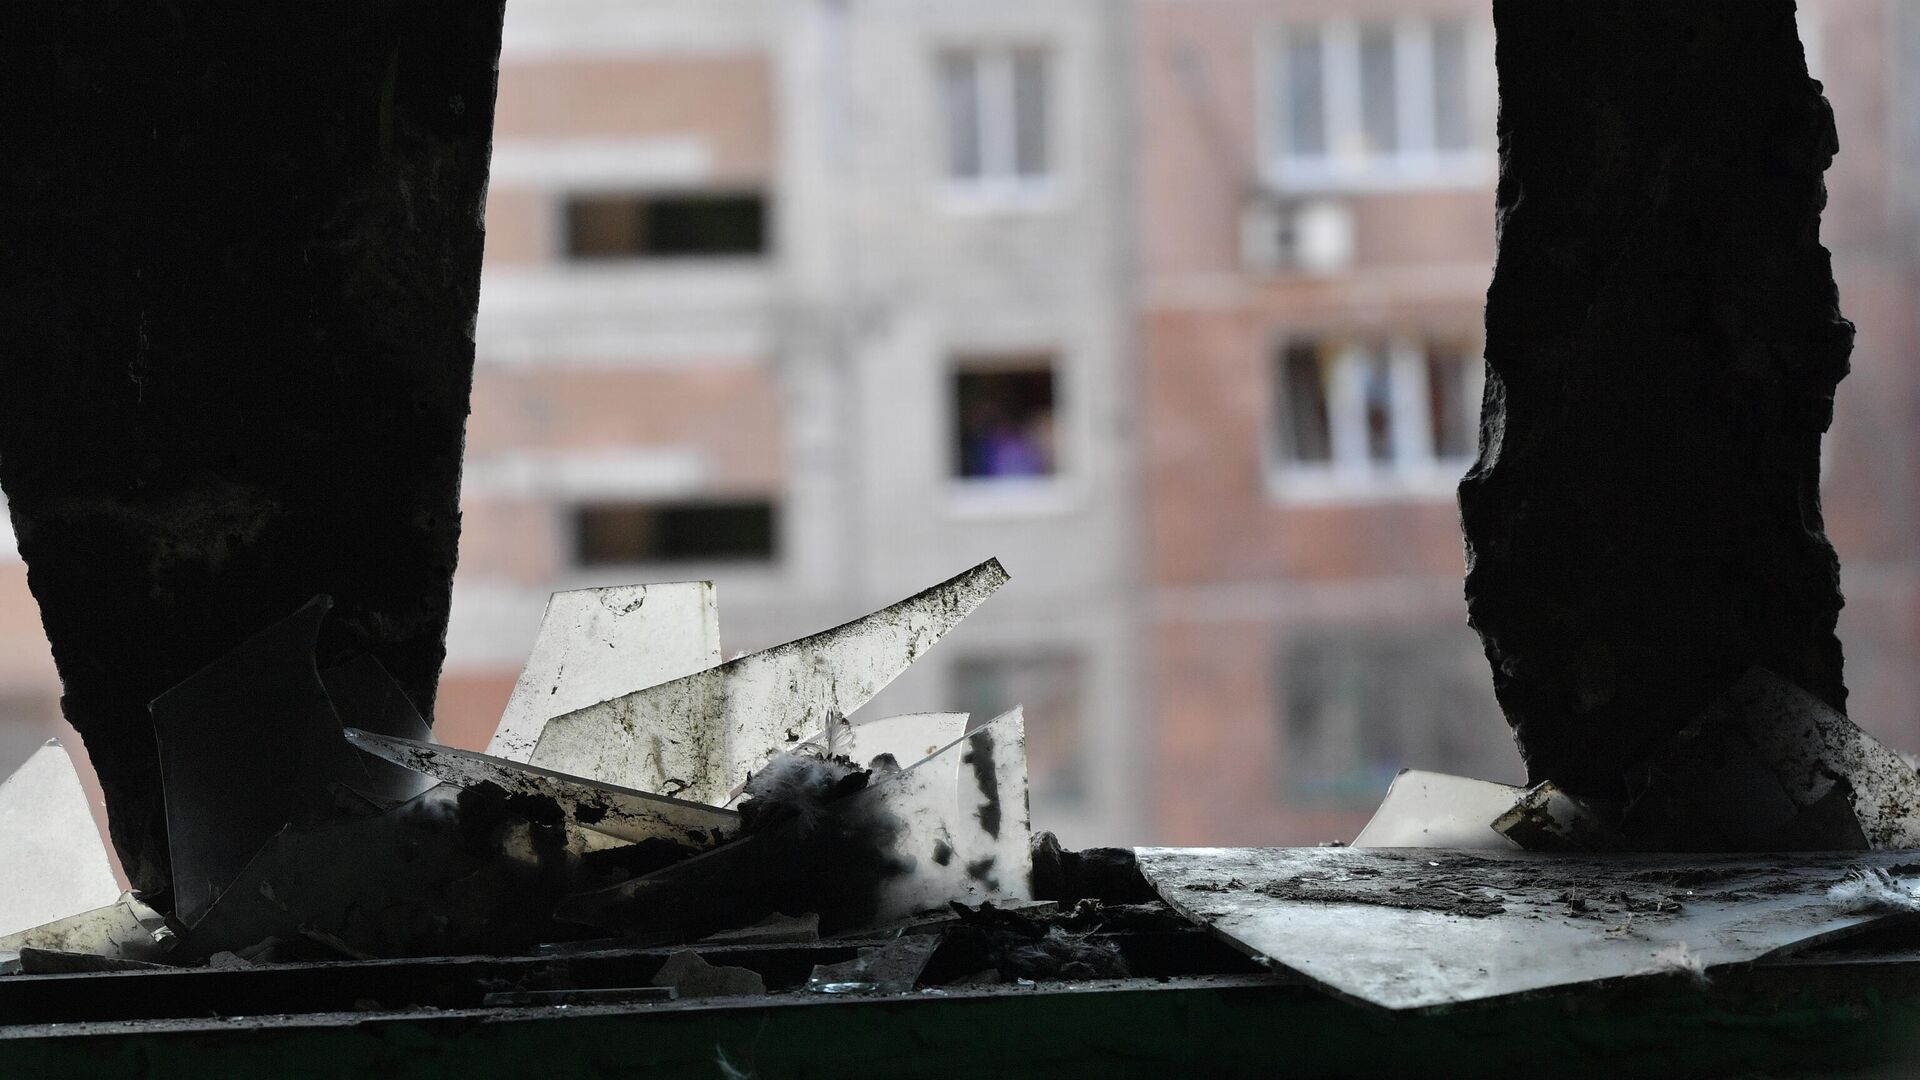 An infrastructure facility was damaged in the Kharkov region